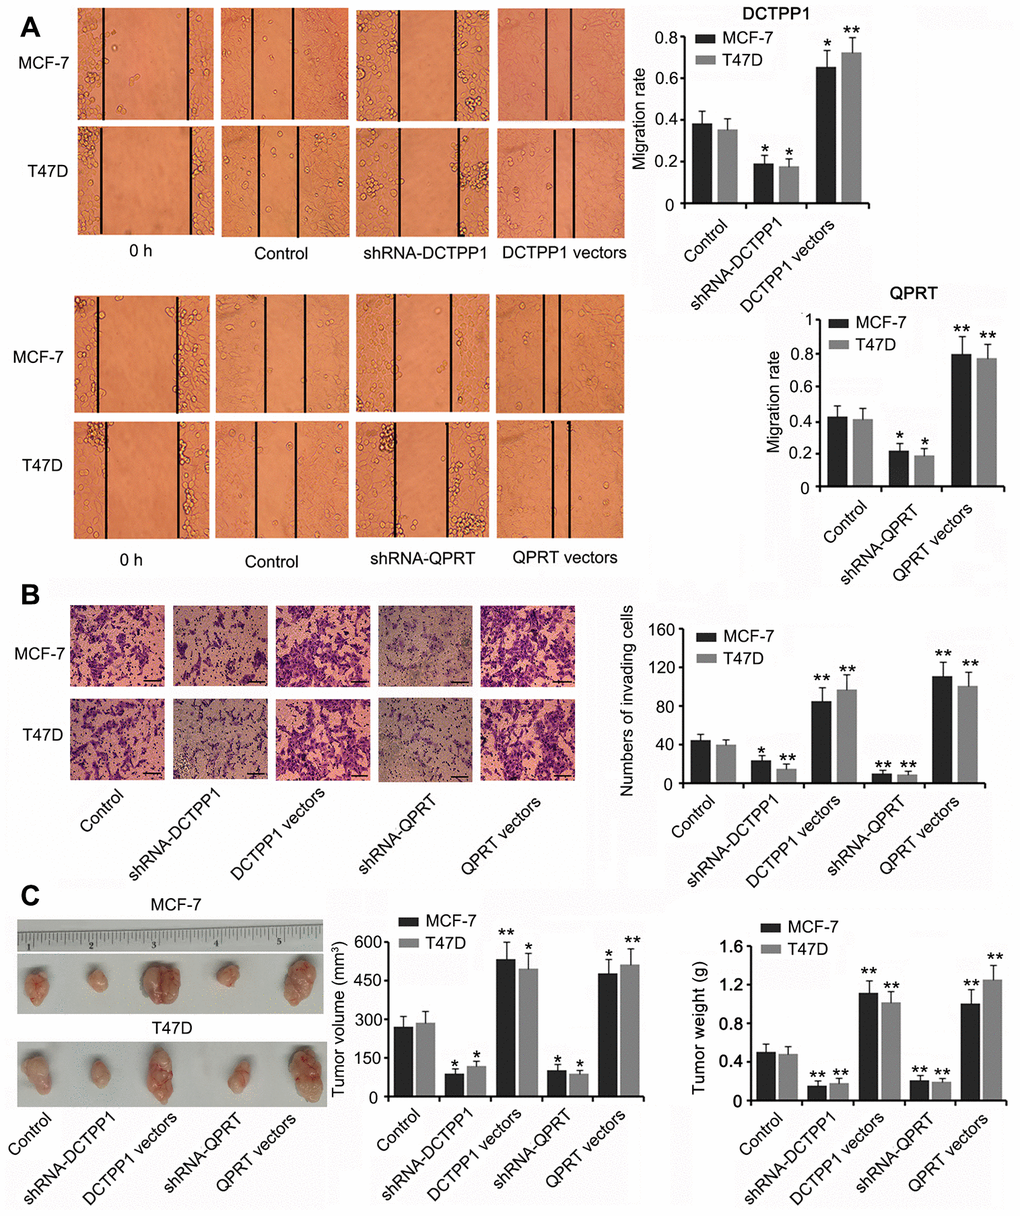 DCTPP1 and QPRT promoted the invasion and growth of BC cells. MCF-7 and T47D cells were transfected with shRNA-DCTPP1, shRNA-QPRT, and DCTPP1 and QPRT expression vectors. The migration (A) and invasion (B) of BC cells were inhibited after DCTPP1 and QPRT knockdown, but enhanced after DCTPP1 and QPRT overexpression. The bar in the pictures (B) indicates a length of 5 μm. (C) As indicated by the tumour xenograft assay, silencing DCTPP1 or QPRT inhibited the growth of MCF-7 and T47D cells in nude mice. MCF-7 and T47D cells overexpressing DCTPP1 or QPRT showed notably faster growth than that by MCF-7 and T47D control cells. *PP